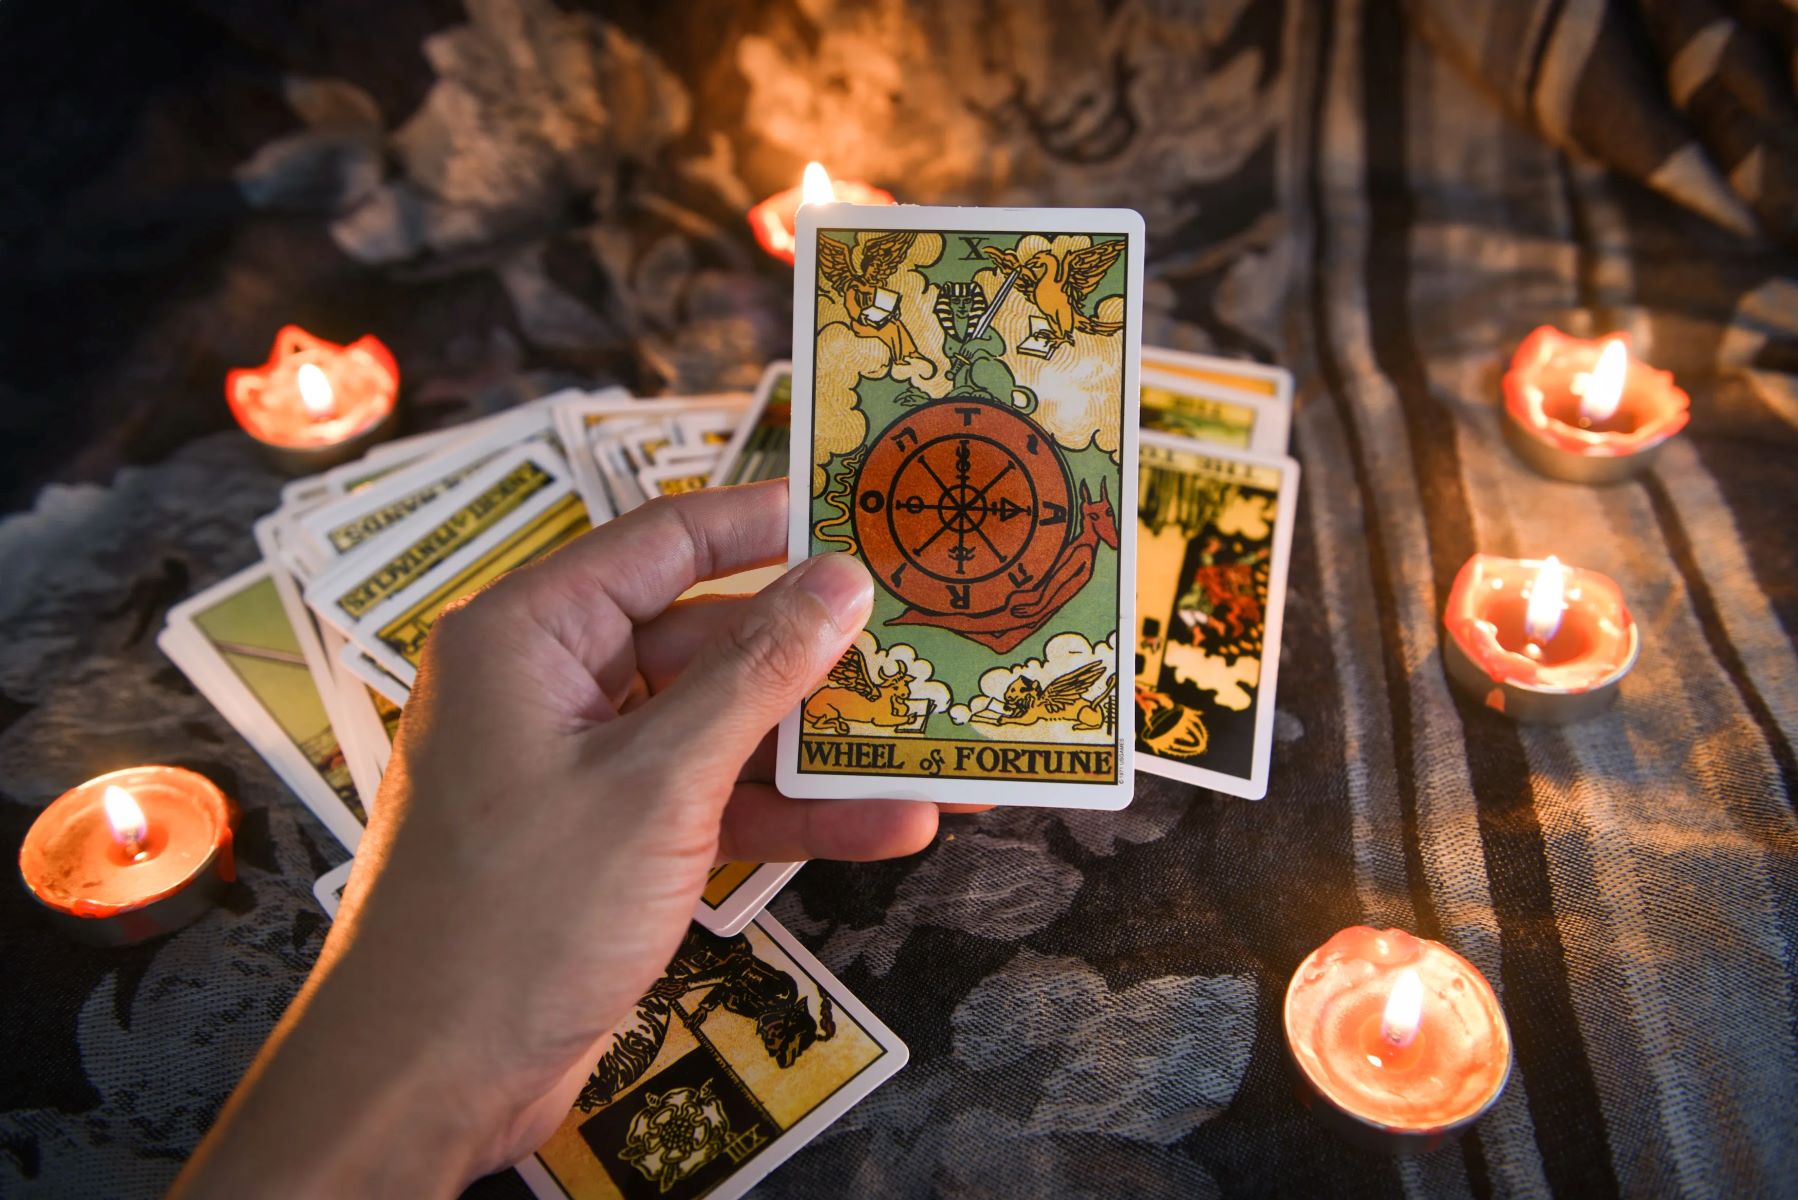 Learn Tarot Reading And Astrology From The Experts!